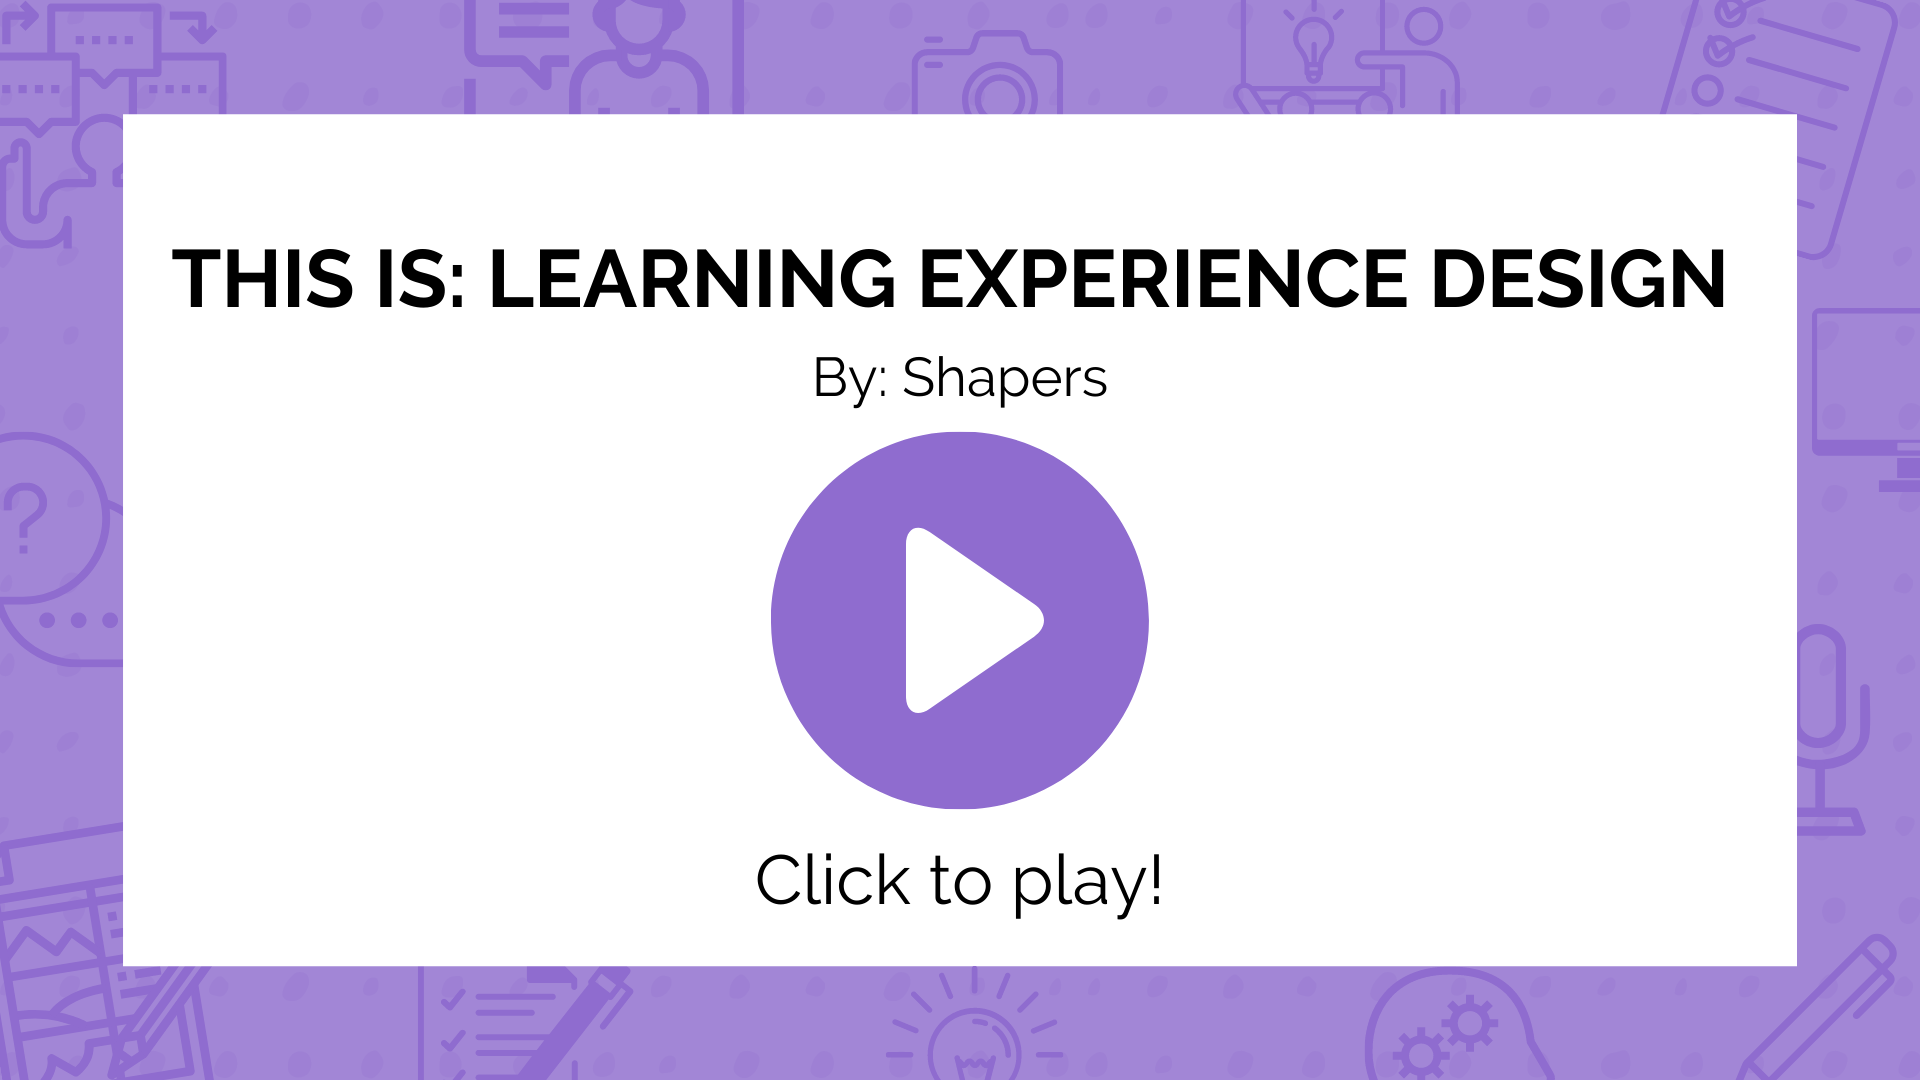 Click this image to open a YouTube video in a new tab, called This Is Learning Experience Design